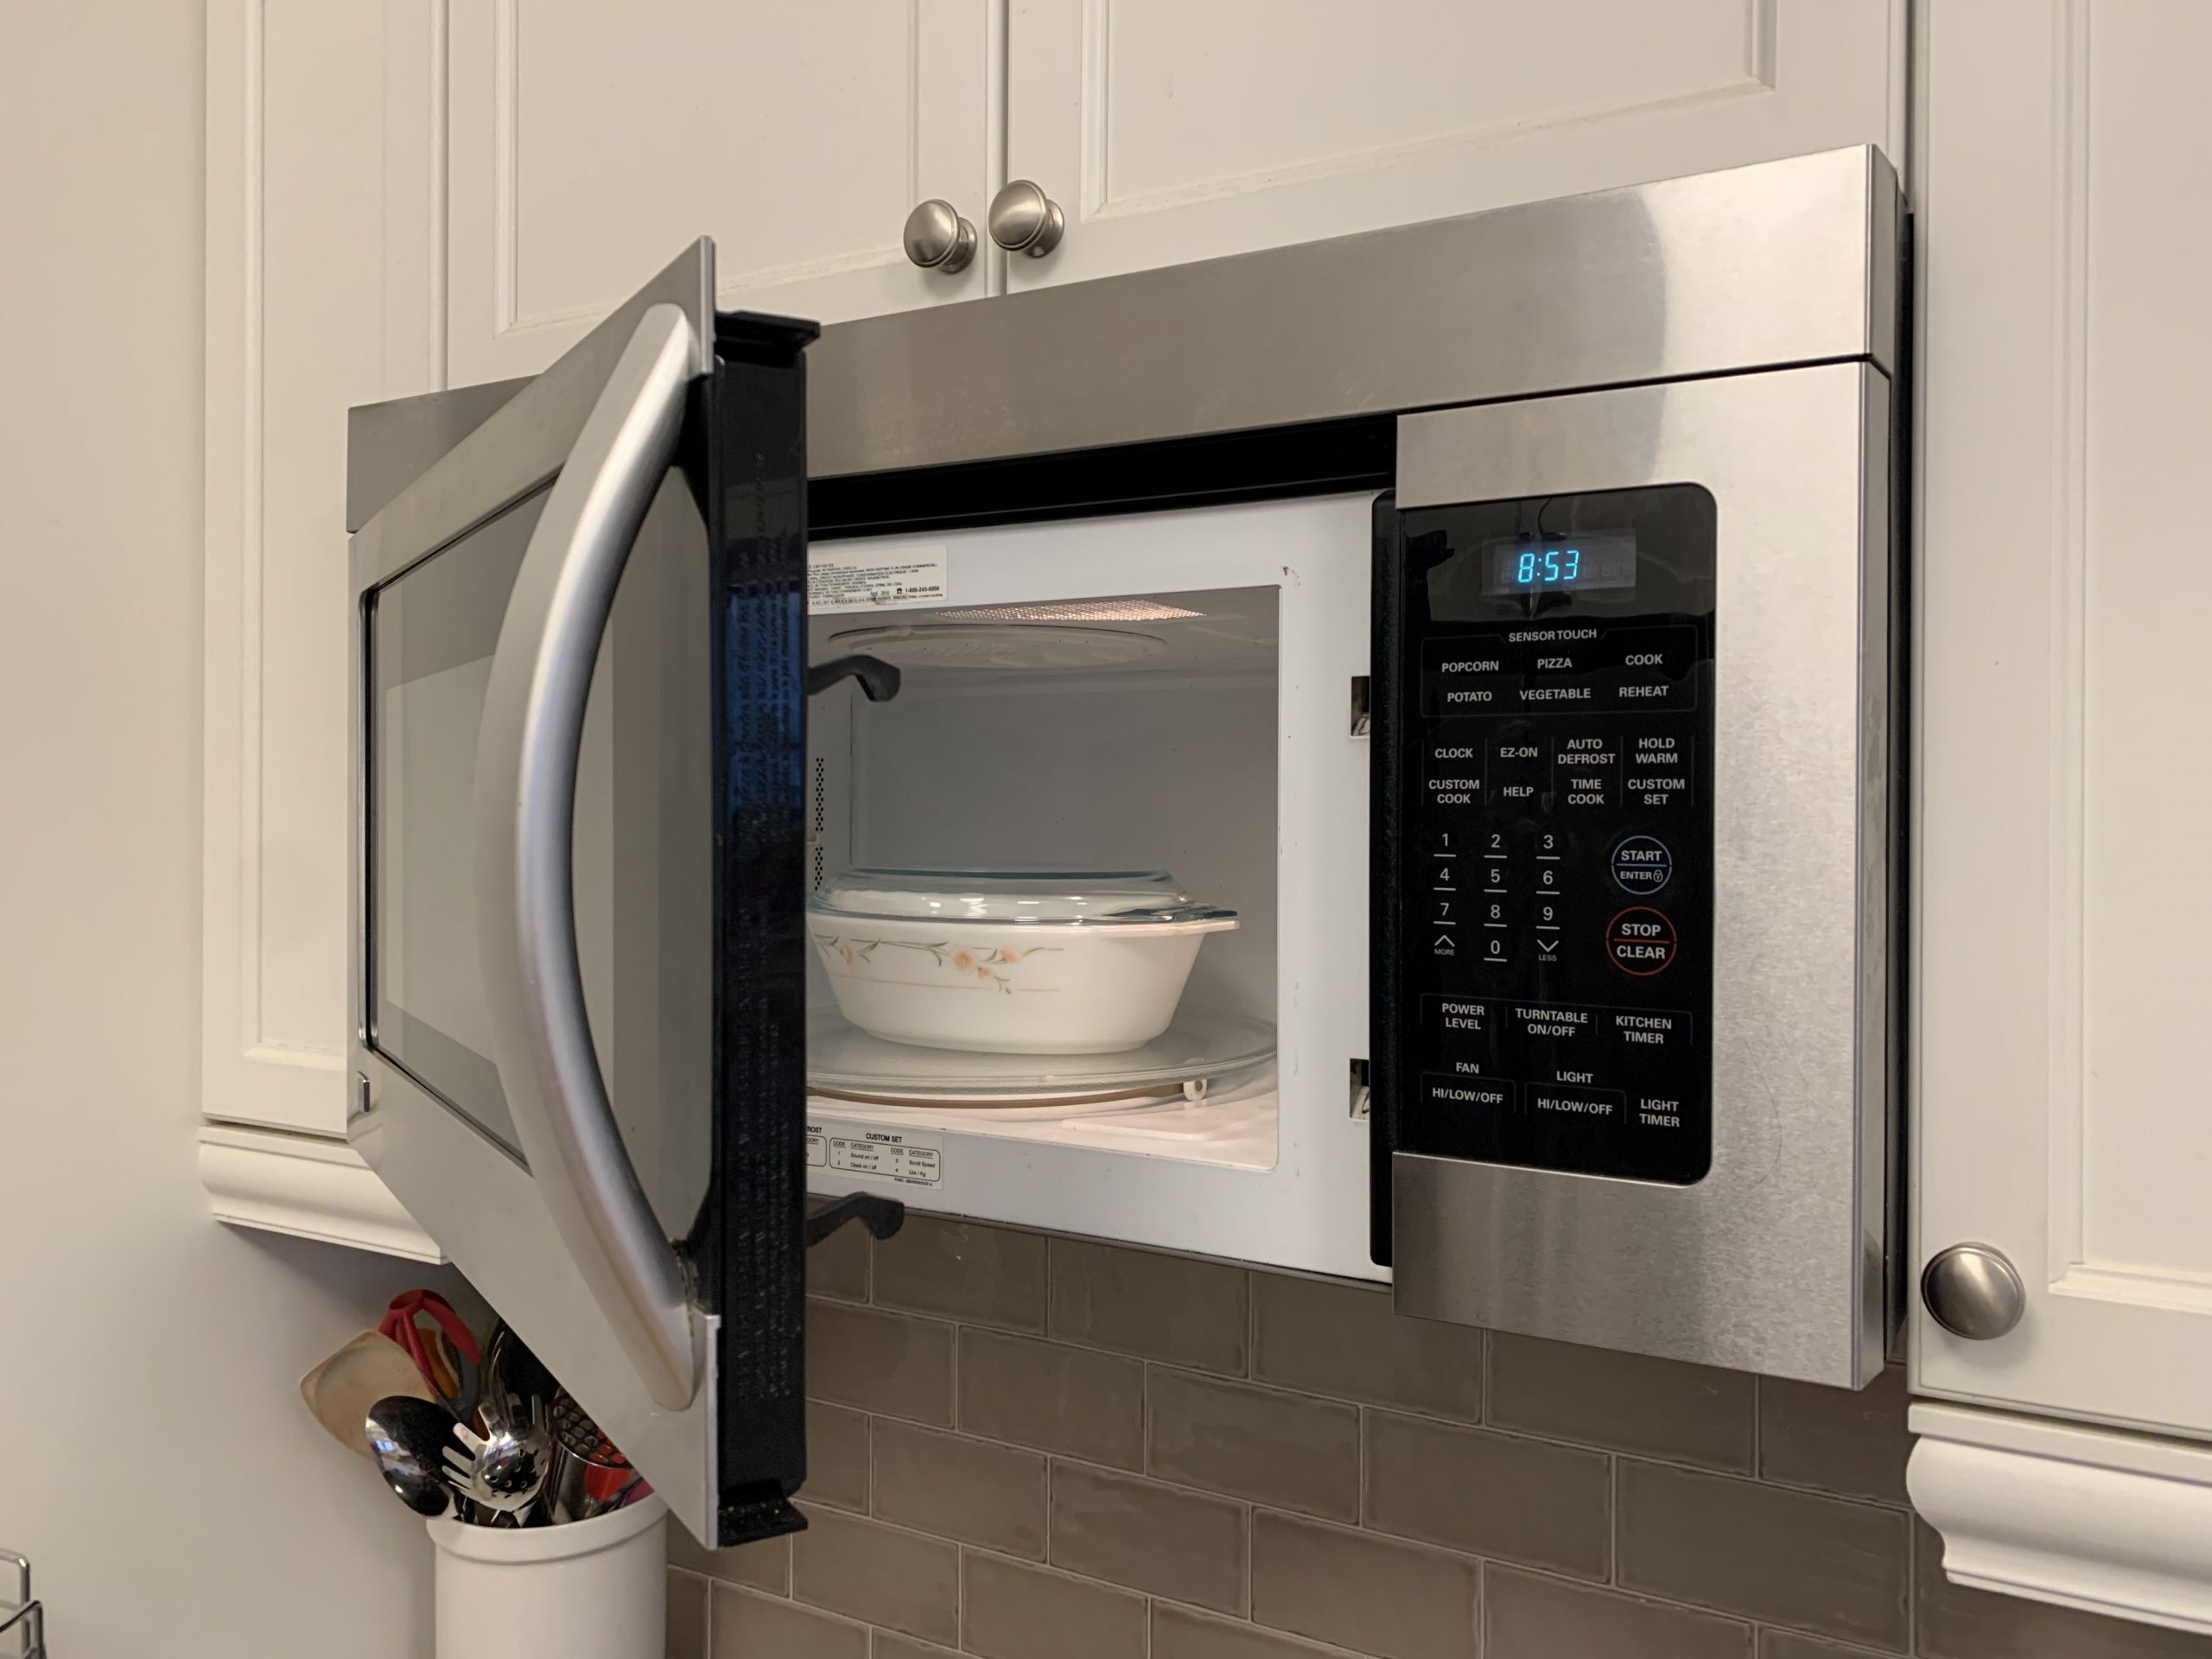 https://homefamily.net/wp-content/uploads/2021/01/Microwave-Cooking-101-scaled.jpg